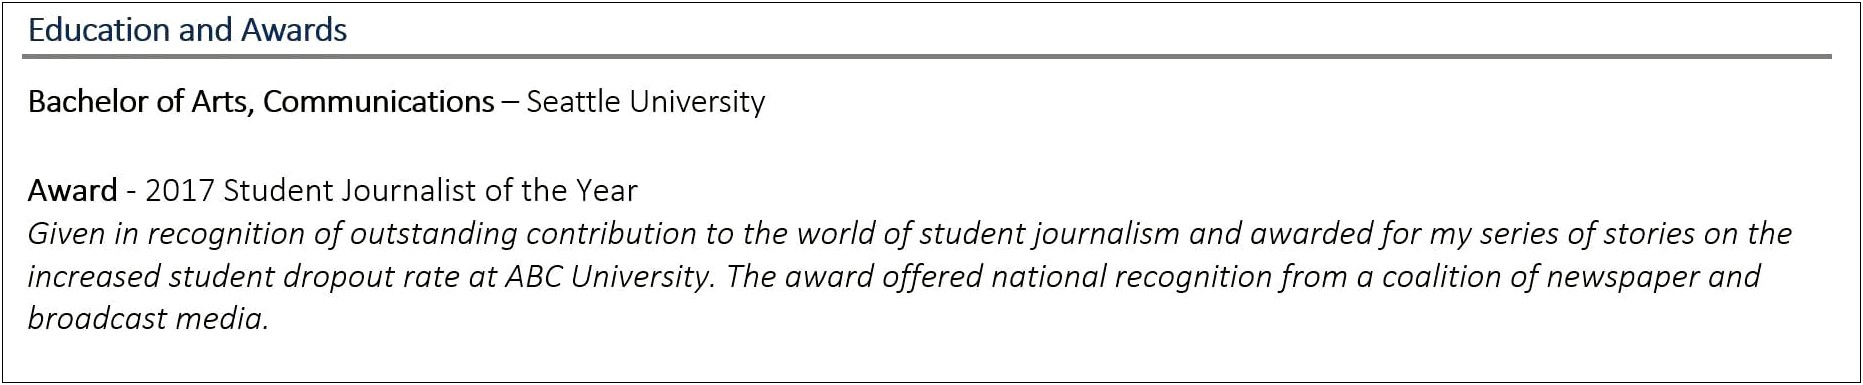 College Awards And Honors Examples Resume